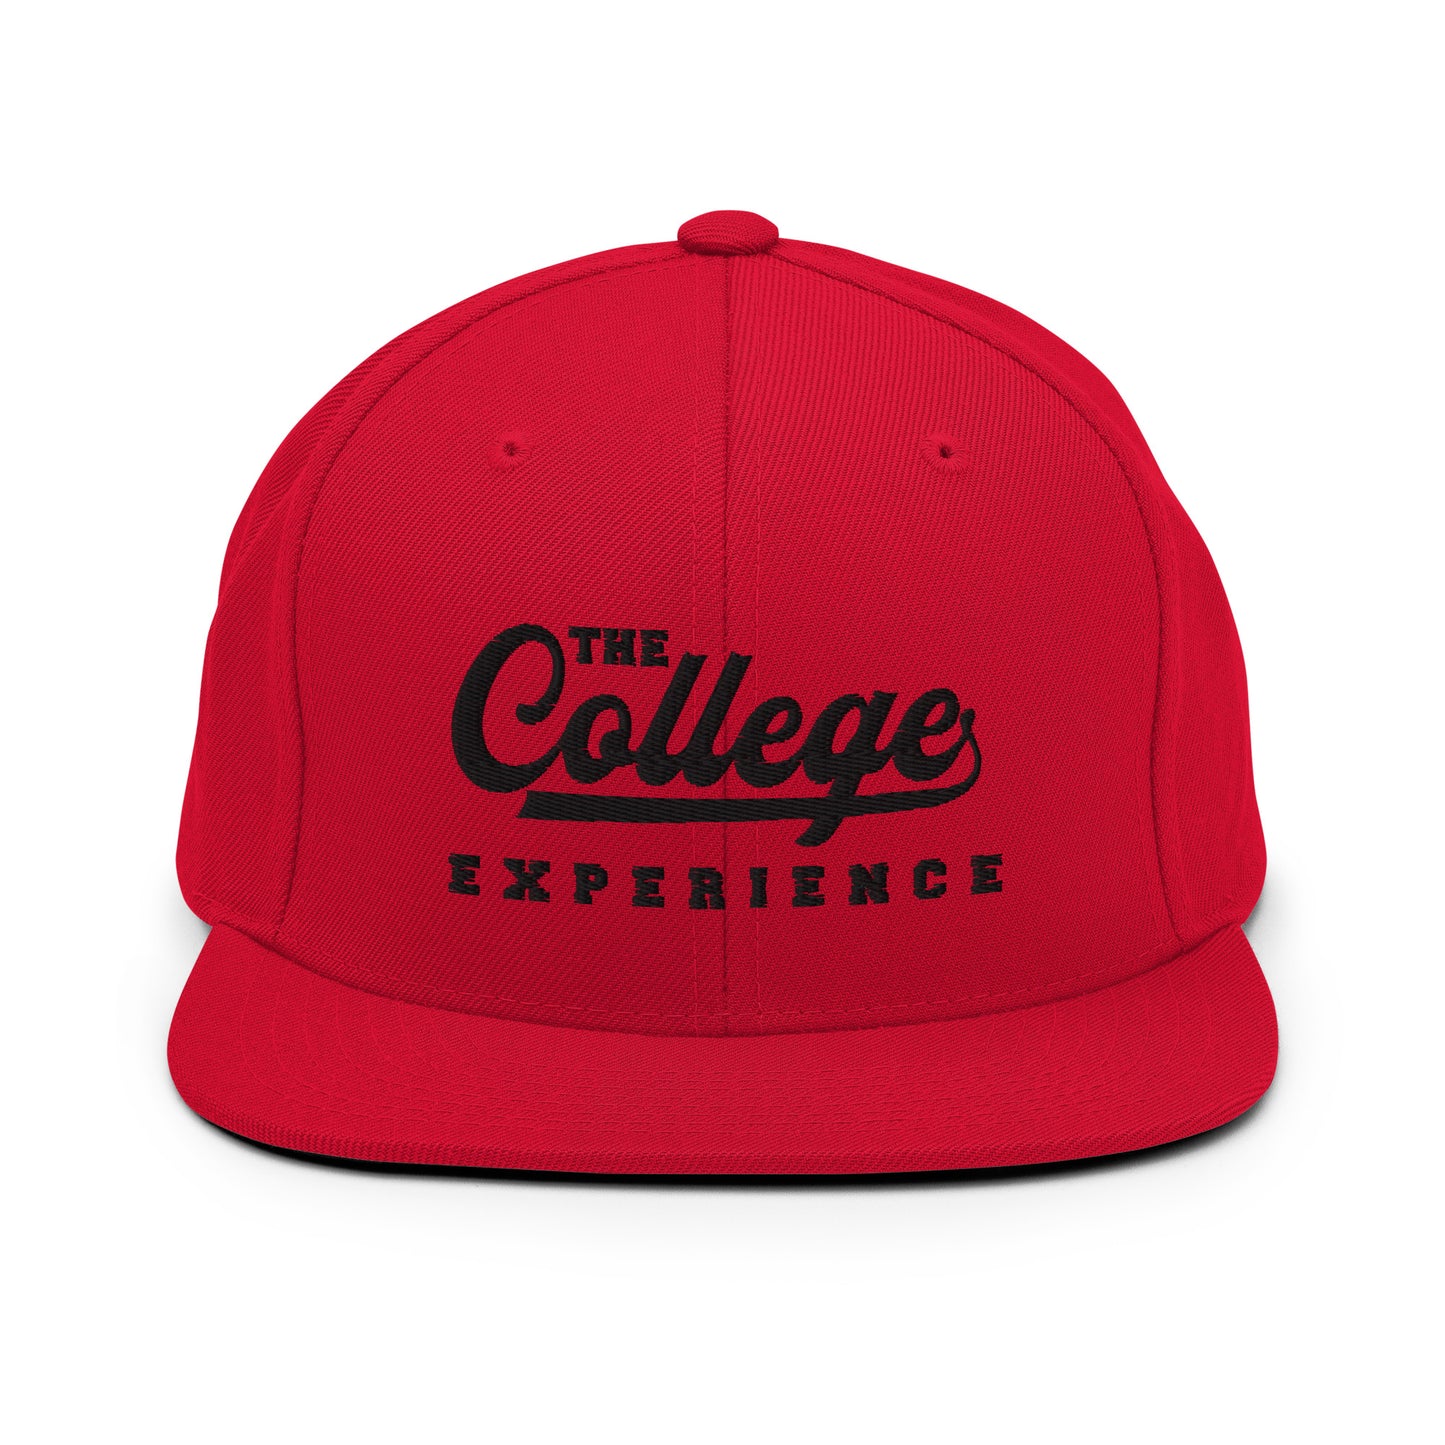 The College Experience - Snapback Hat (Black Logo)